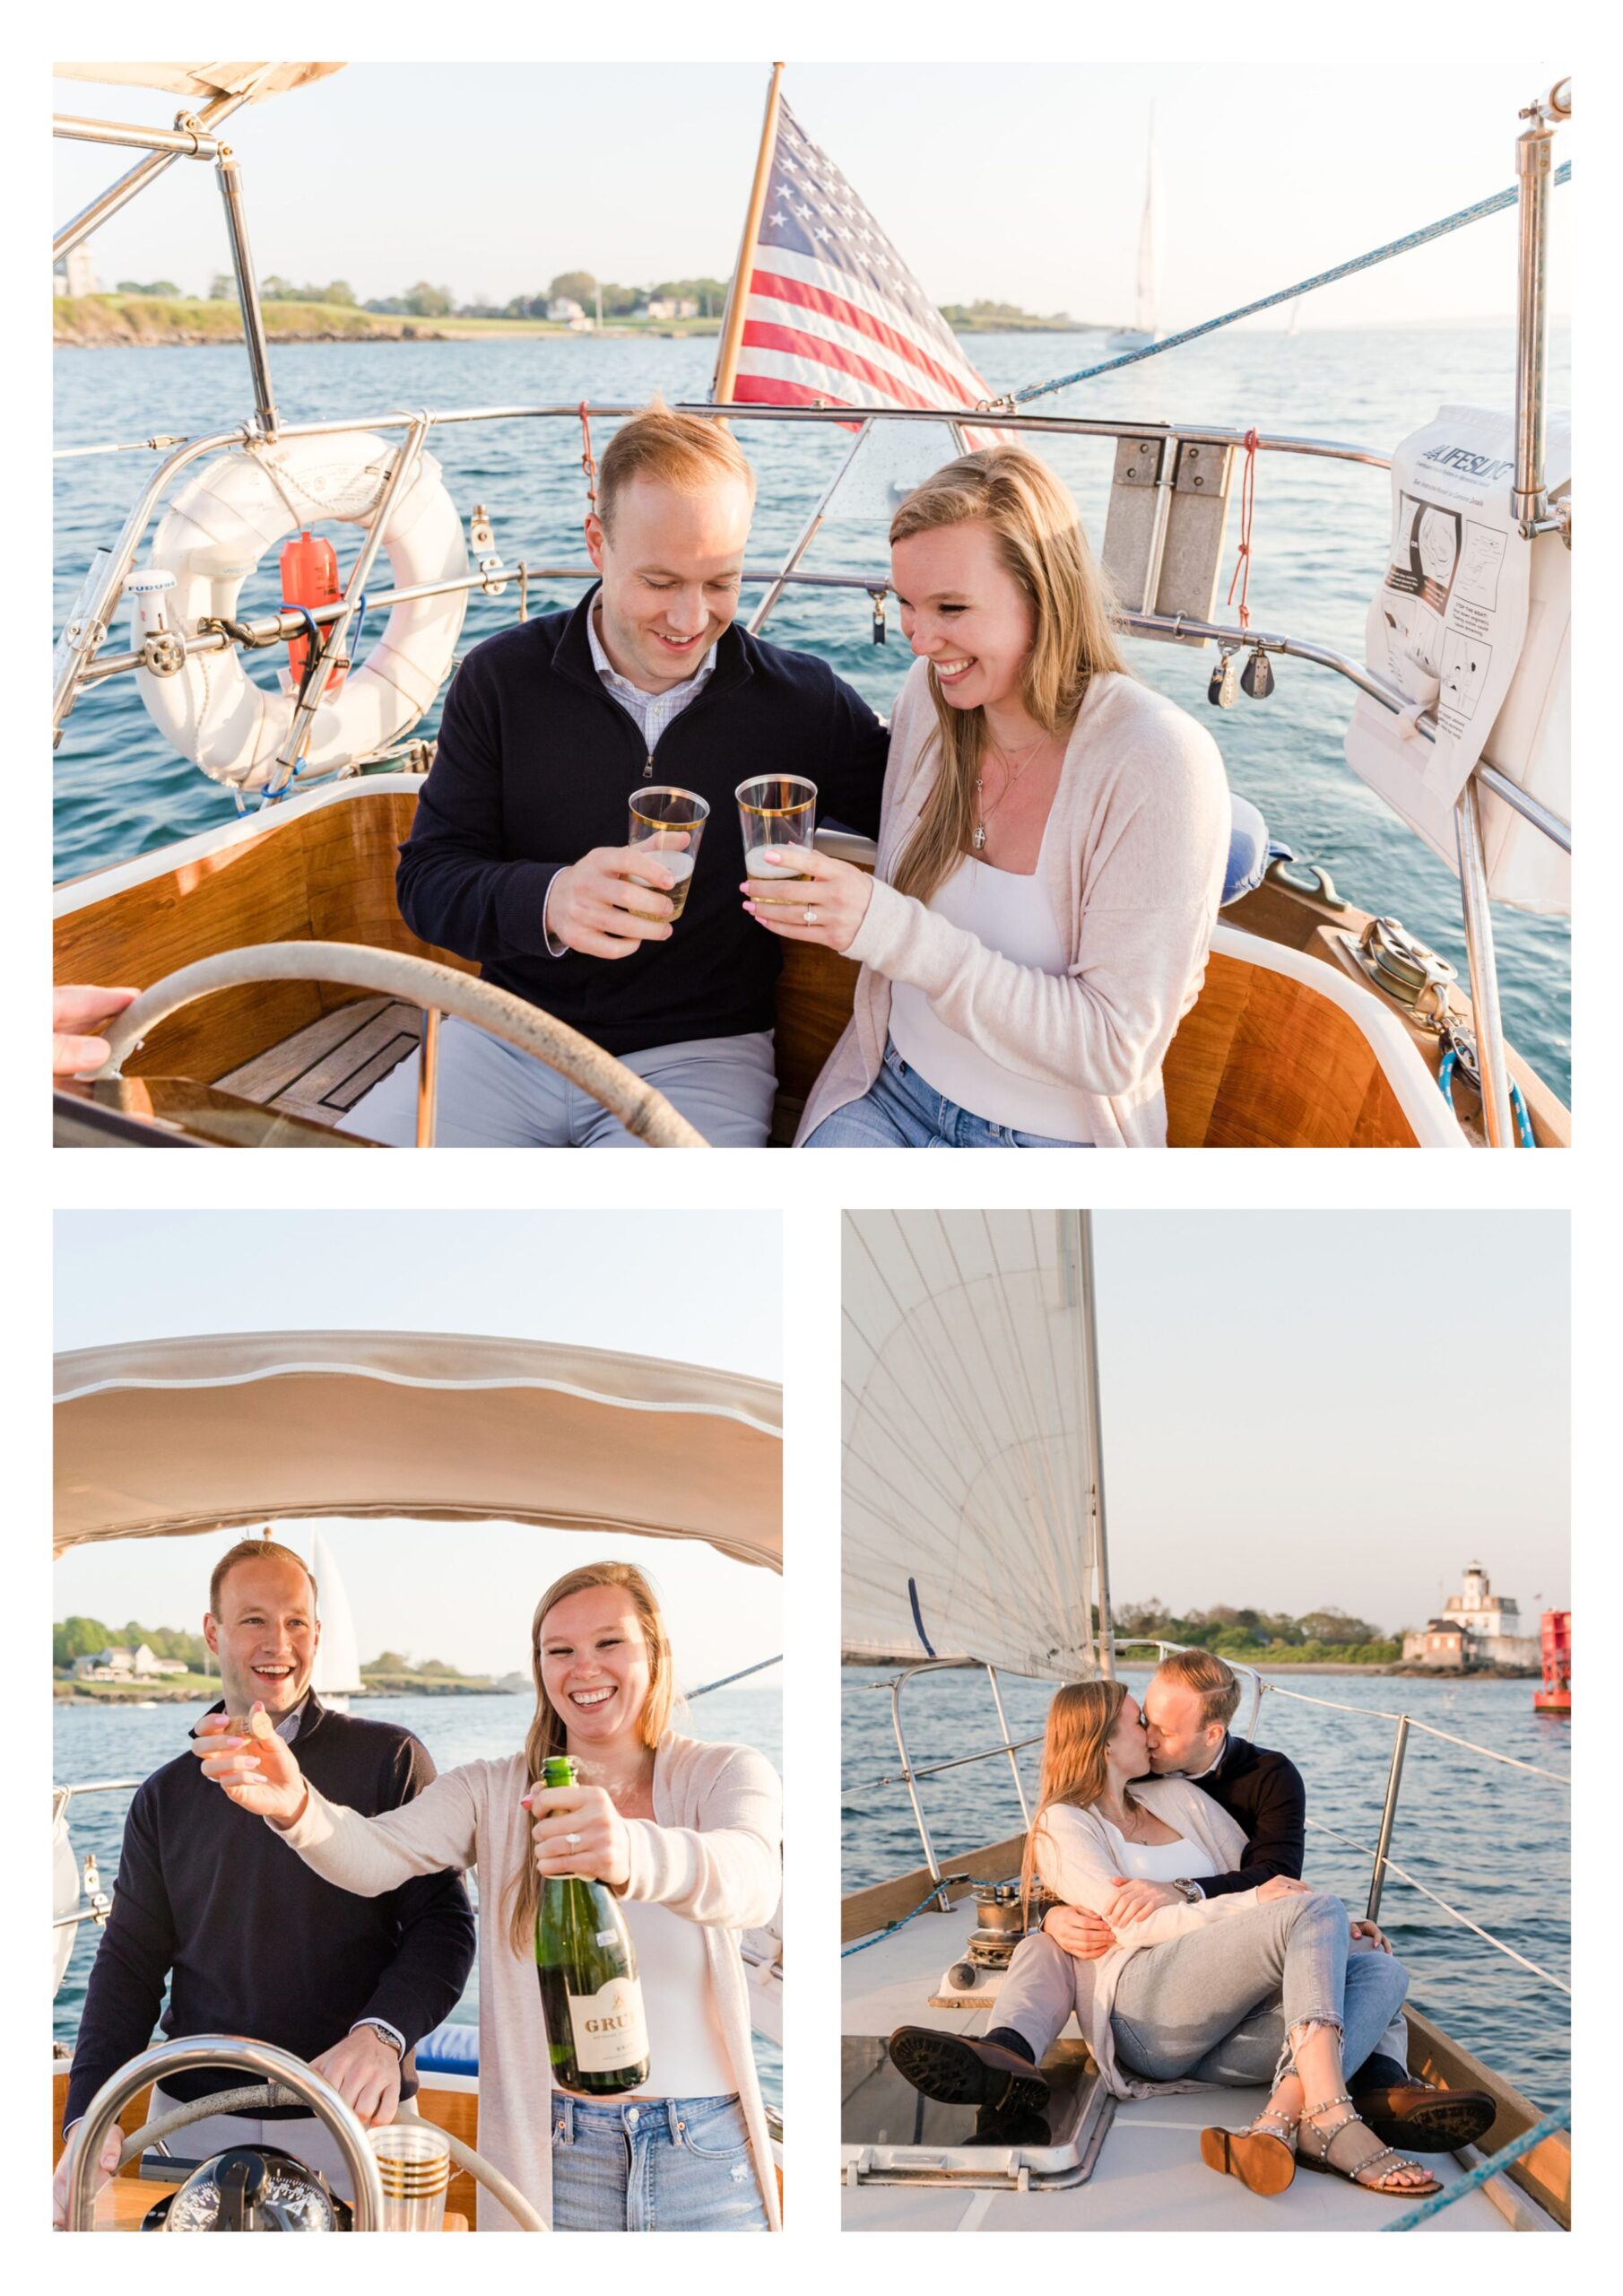 A happily engaged couple celebrate their engagement on a sailboat in Newport Rhode Island. 